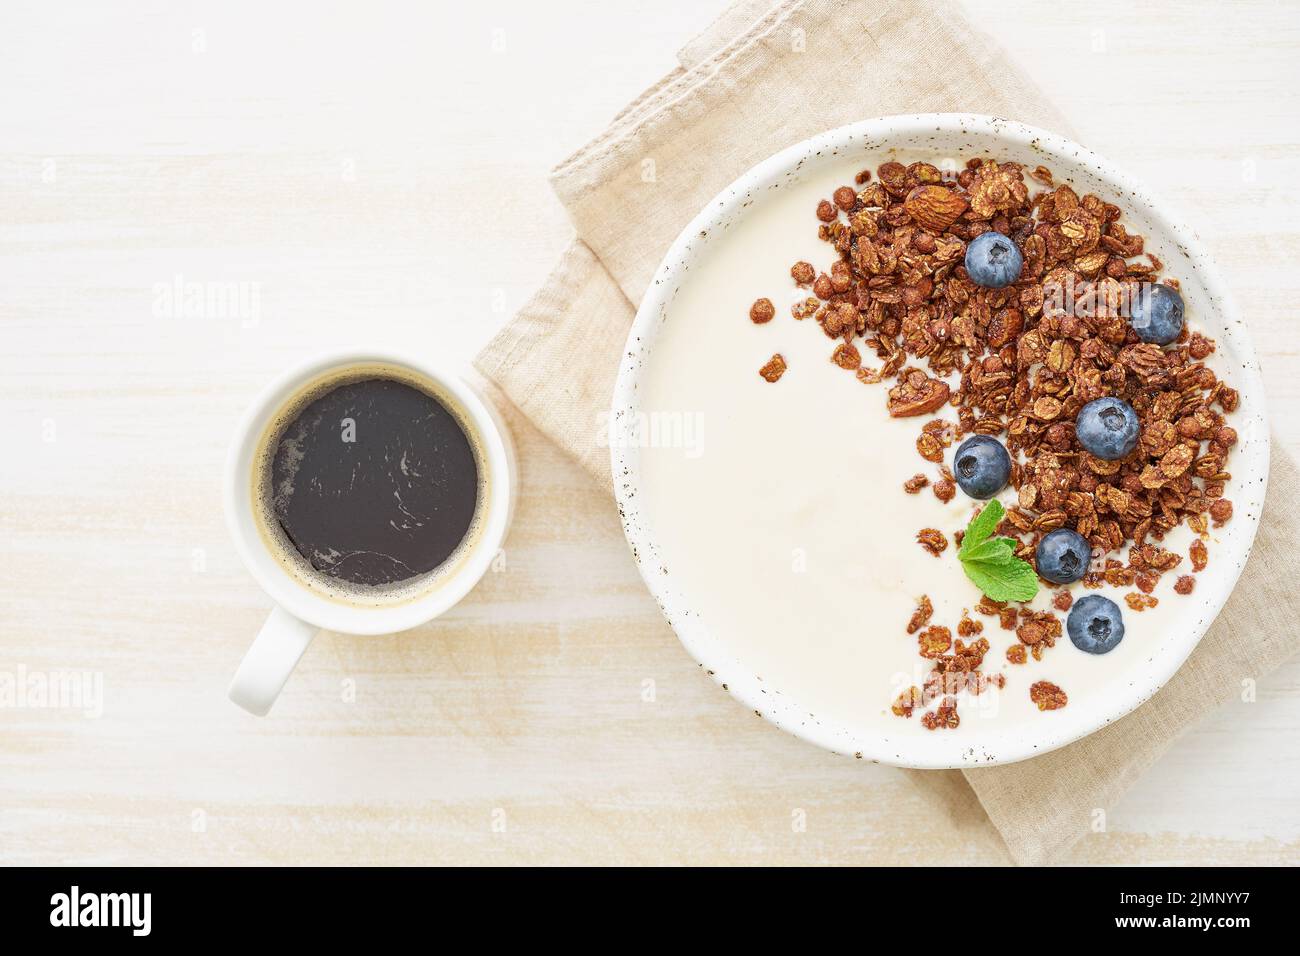 Yogurt with chocolate granola, bilberry. Breakfast with cupof coffee on a white background Stock Photo